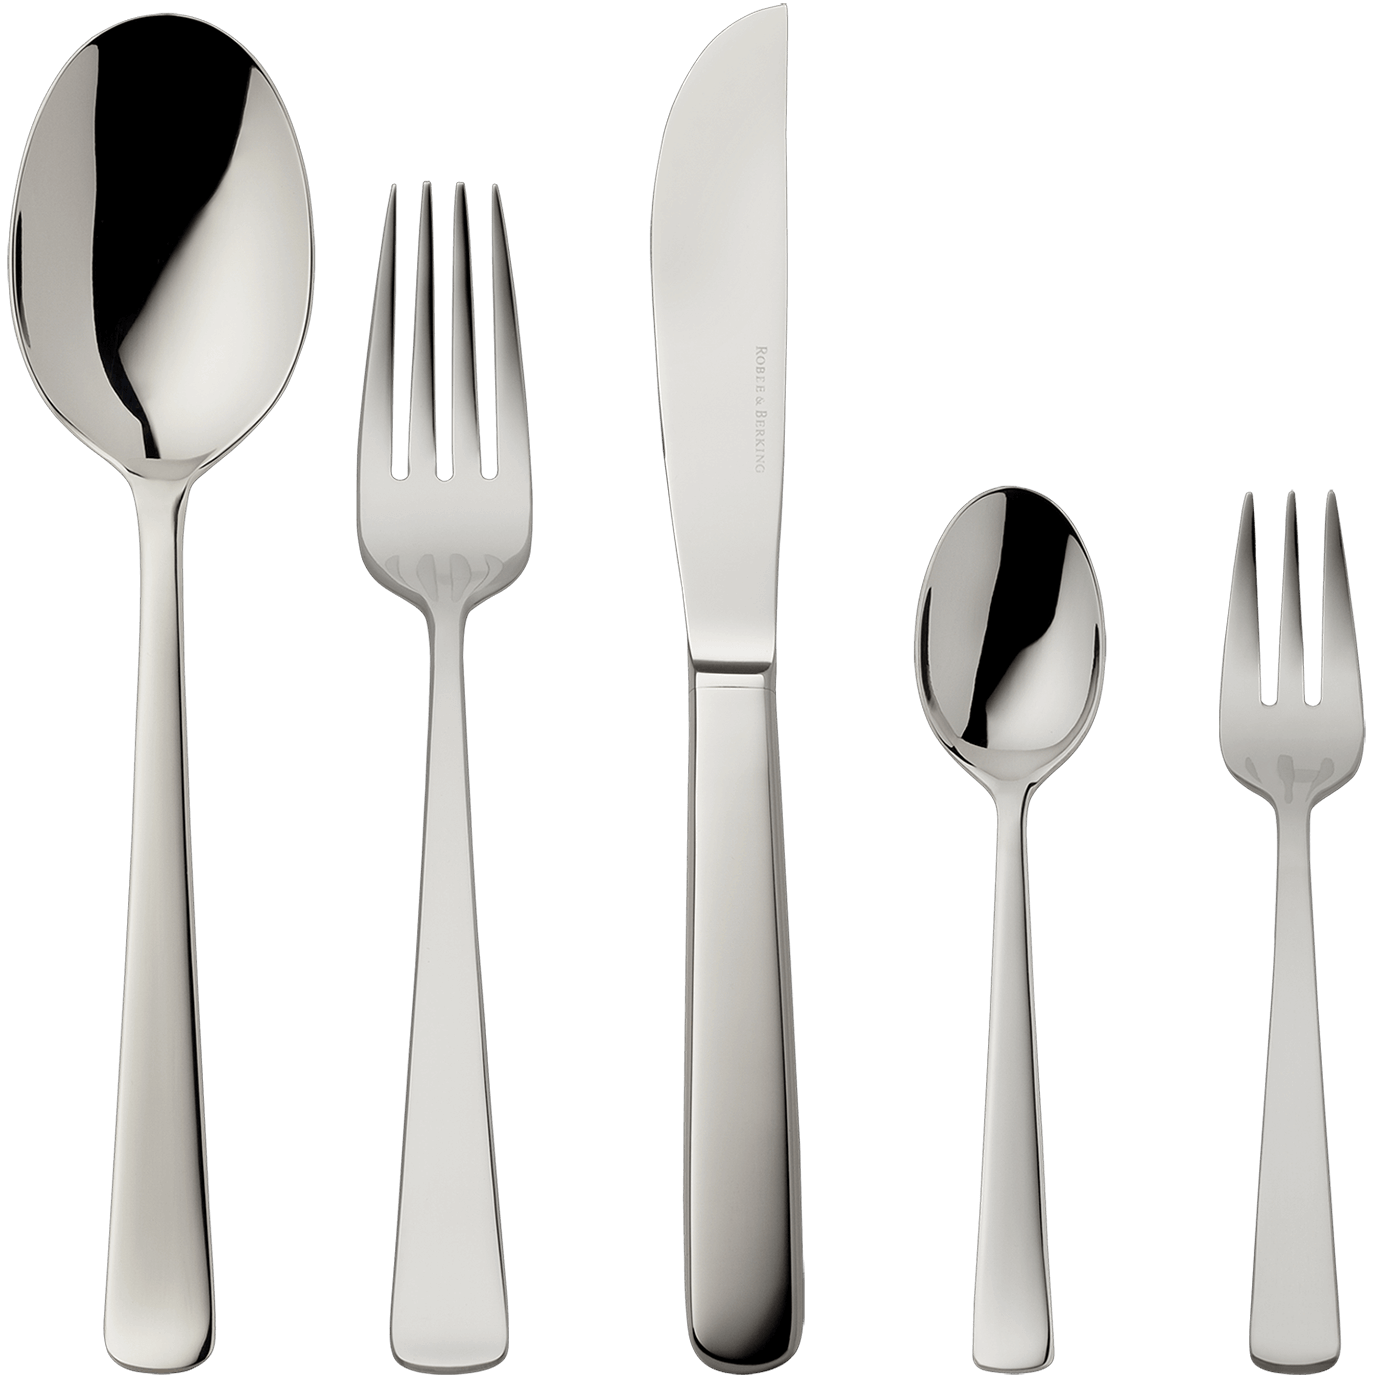 Atlantic Brillant 5-piece place setting (18/8 stainless steel)